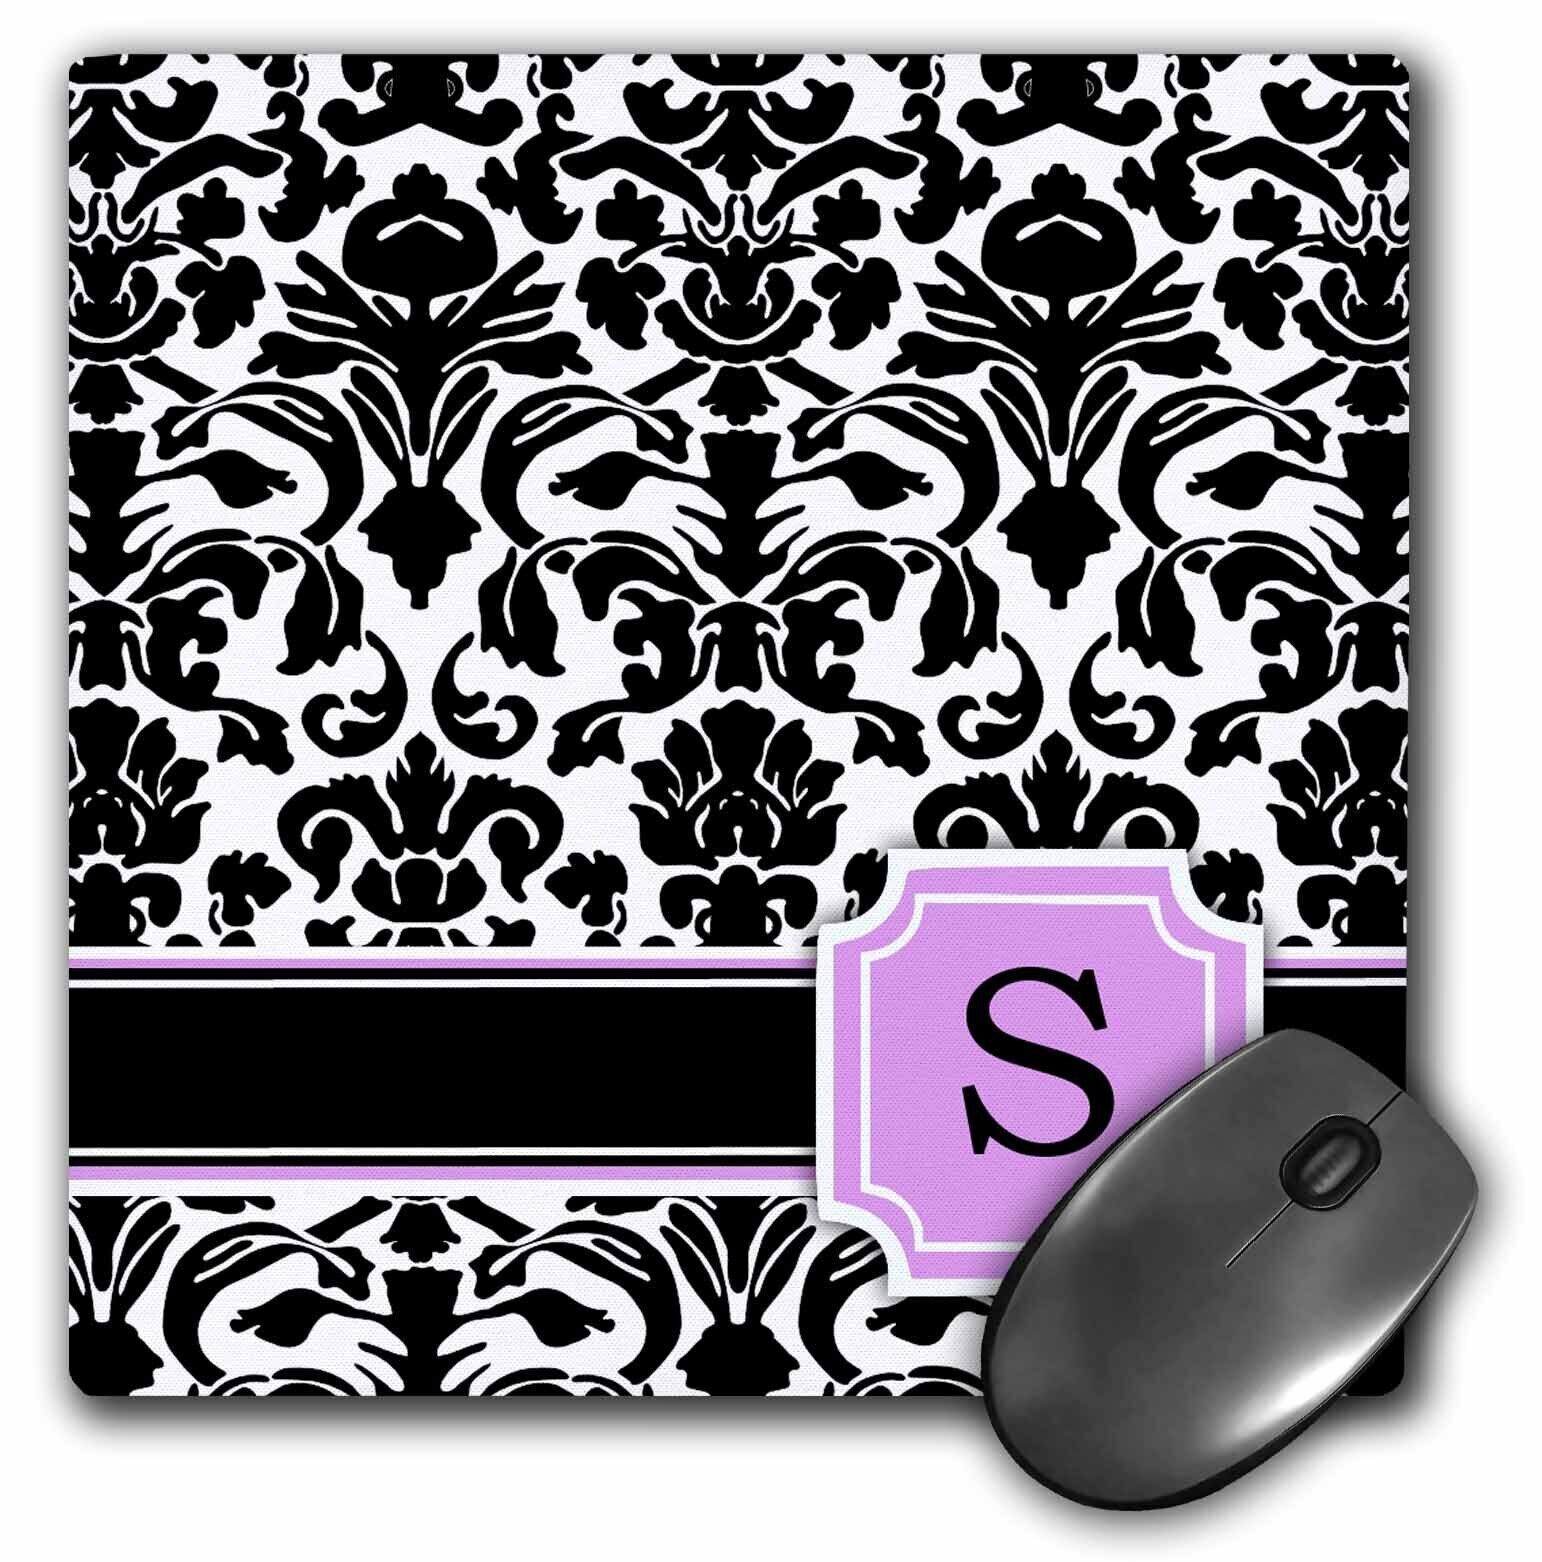 3dRose Personal initial S monogrammed pink black and white damask pattern girly